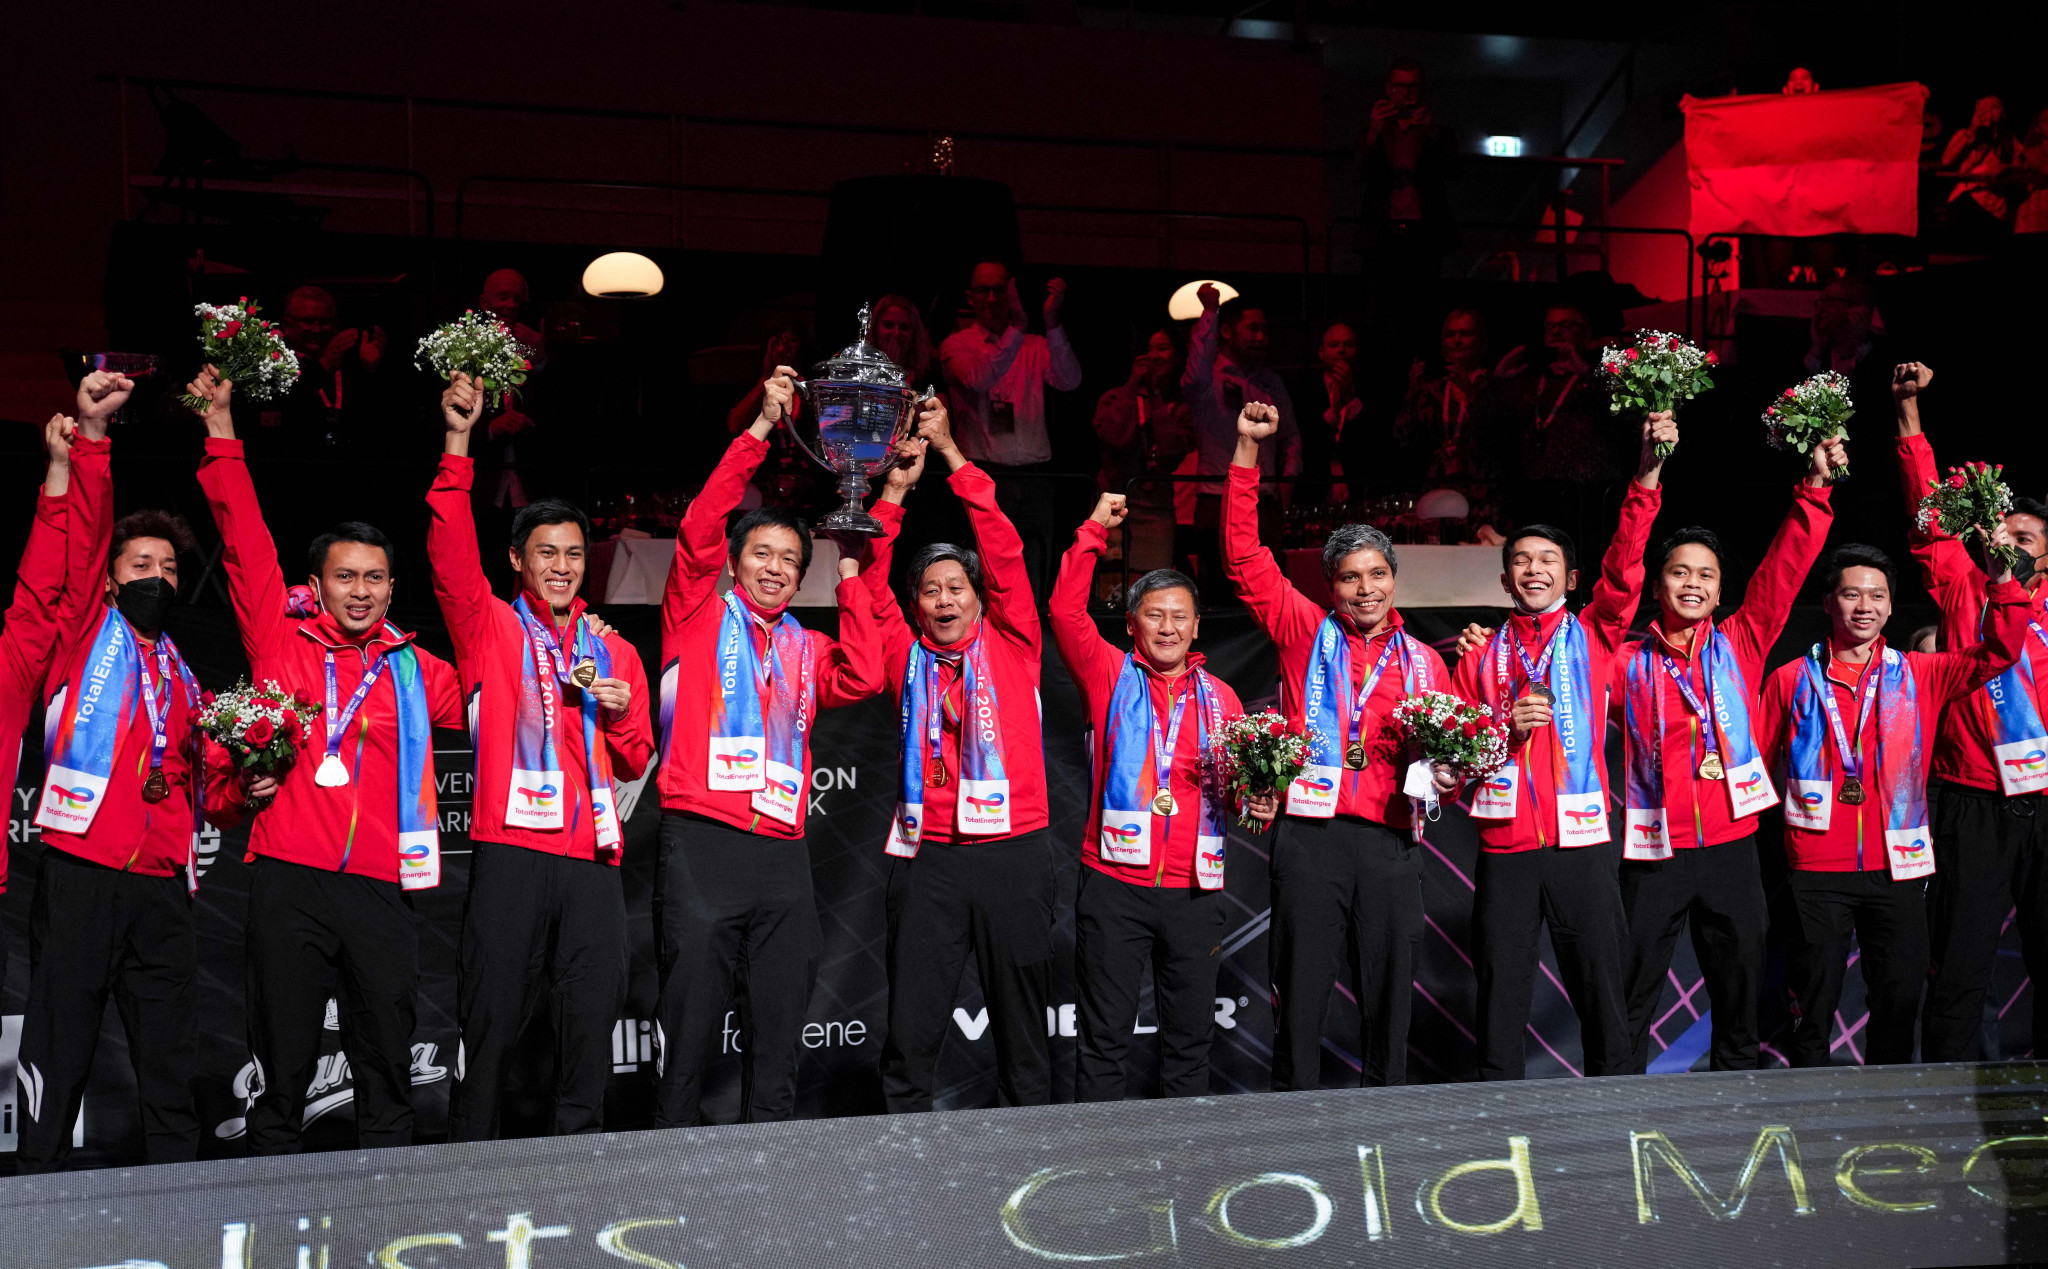 Indonesia's flag was not flown during the victory ceremony after the men's badminton team won the Thomas Cup in Denmark last Sunday ©Getty Images